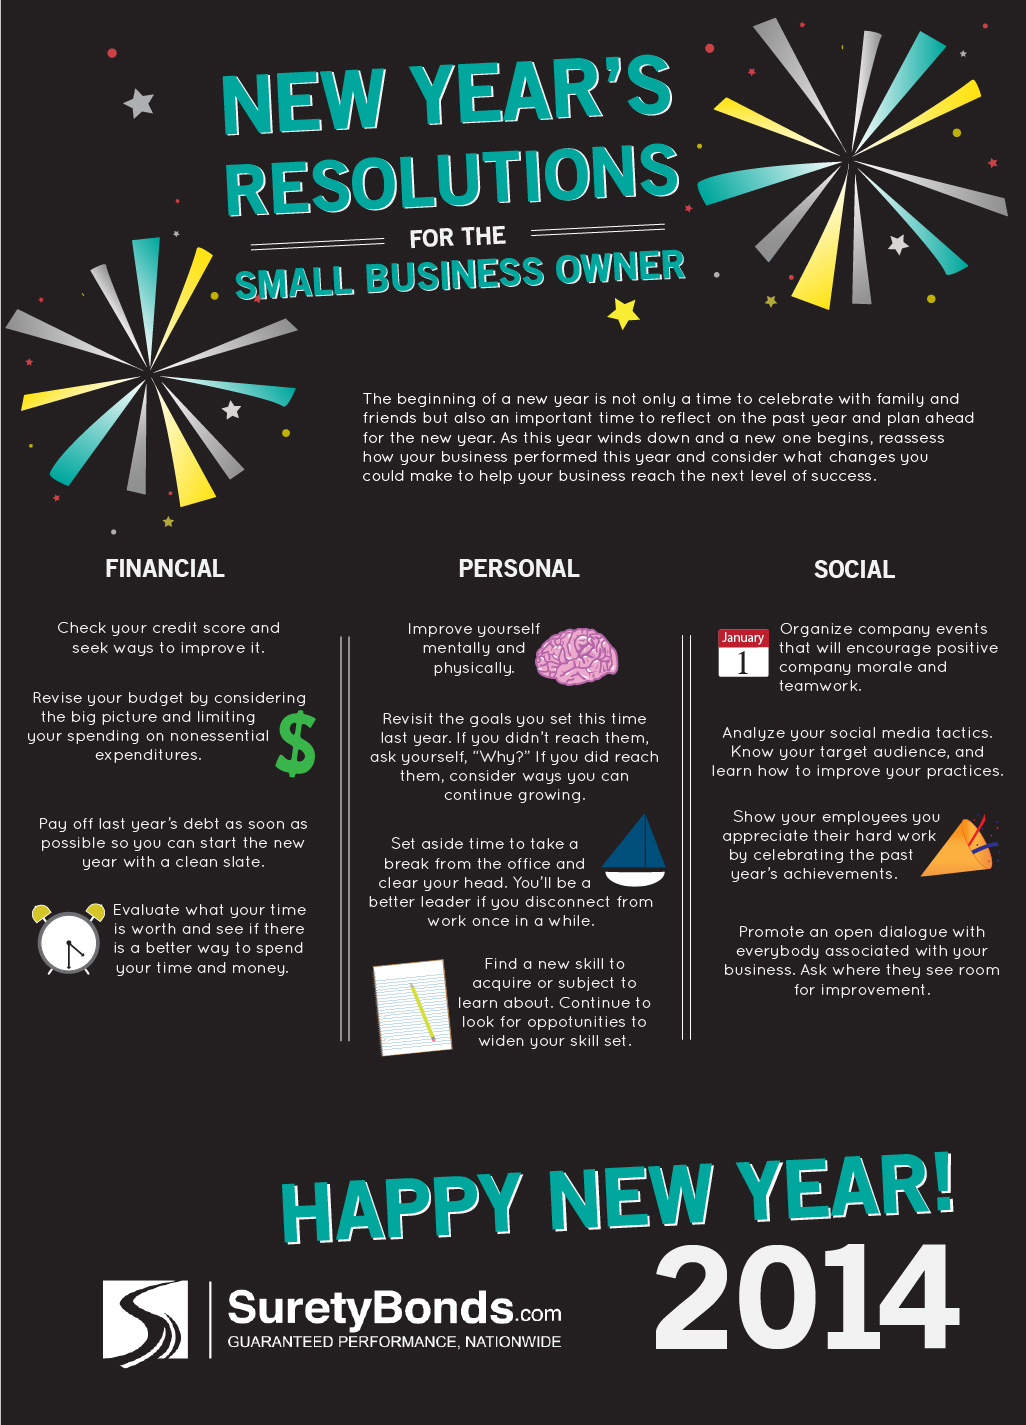 10 New Year's Resolutions for Small Business Owner